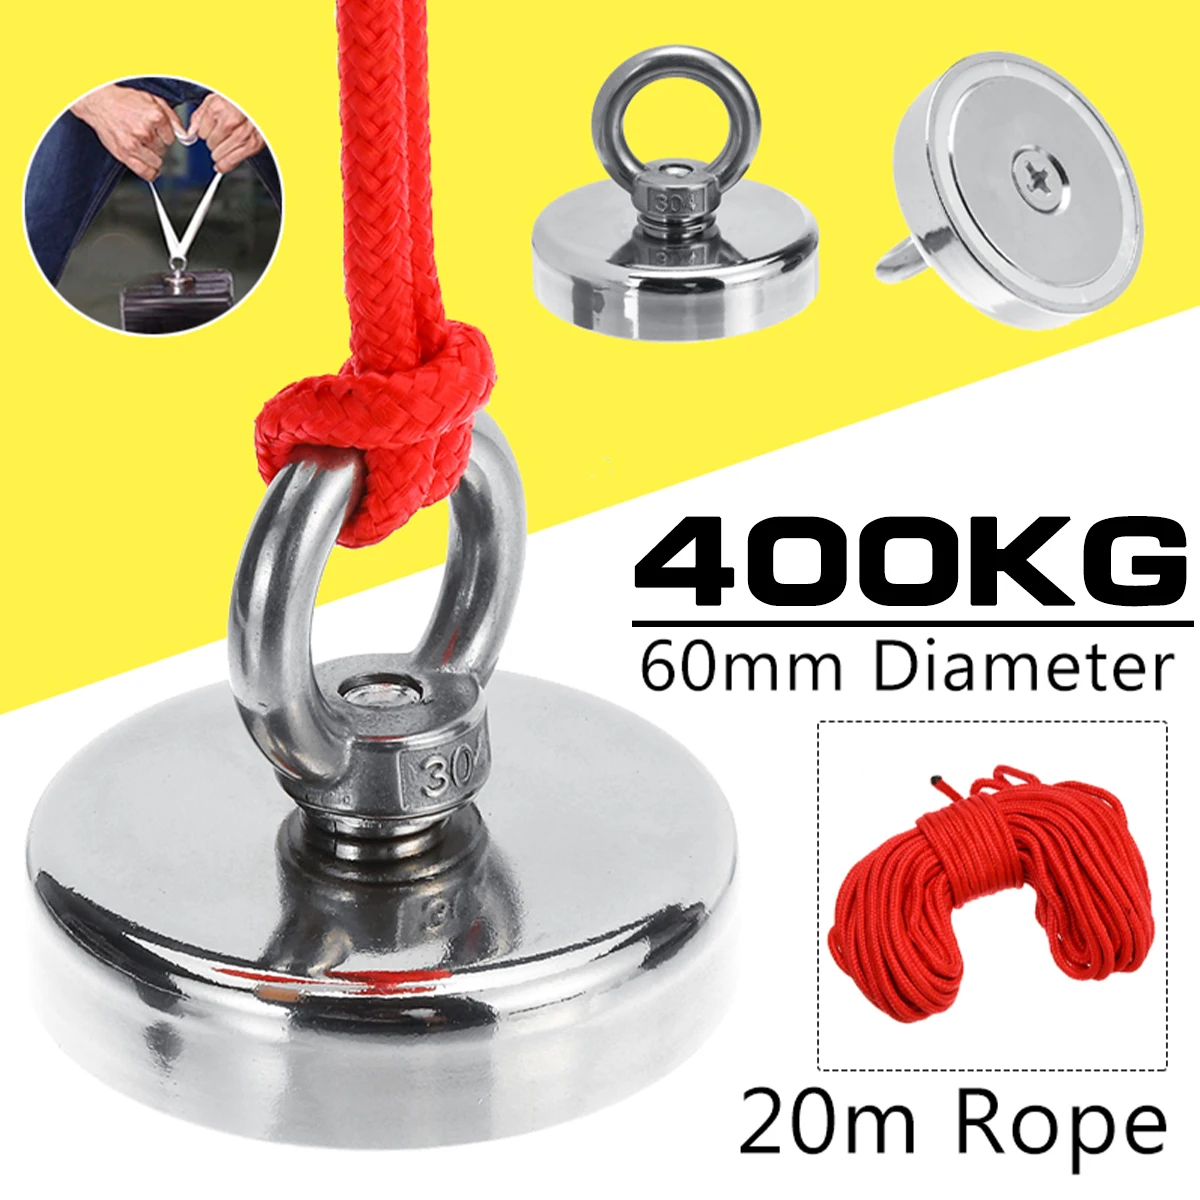 

400KG Strong Powerful Round Neodymium Magnet hook Salvage Magnet Sea Fishing Wquipment Holder Pulling Mounting Pot With 20M Rope